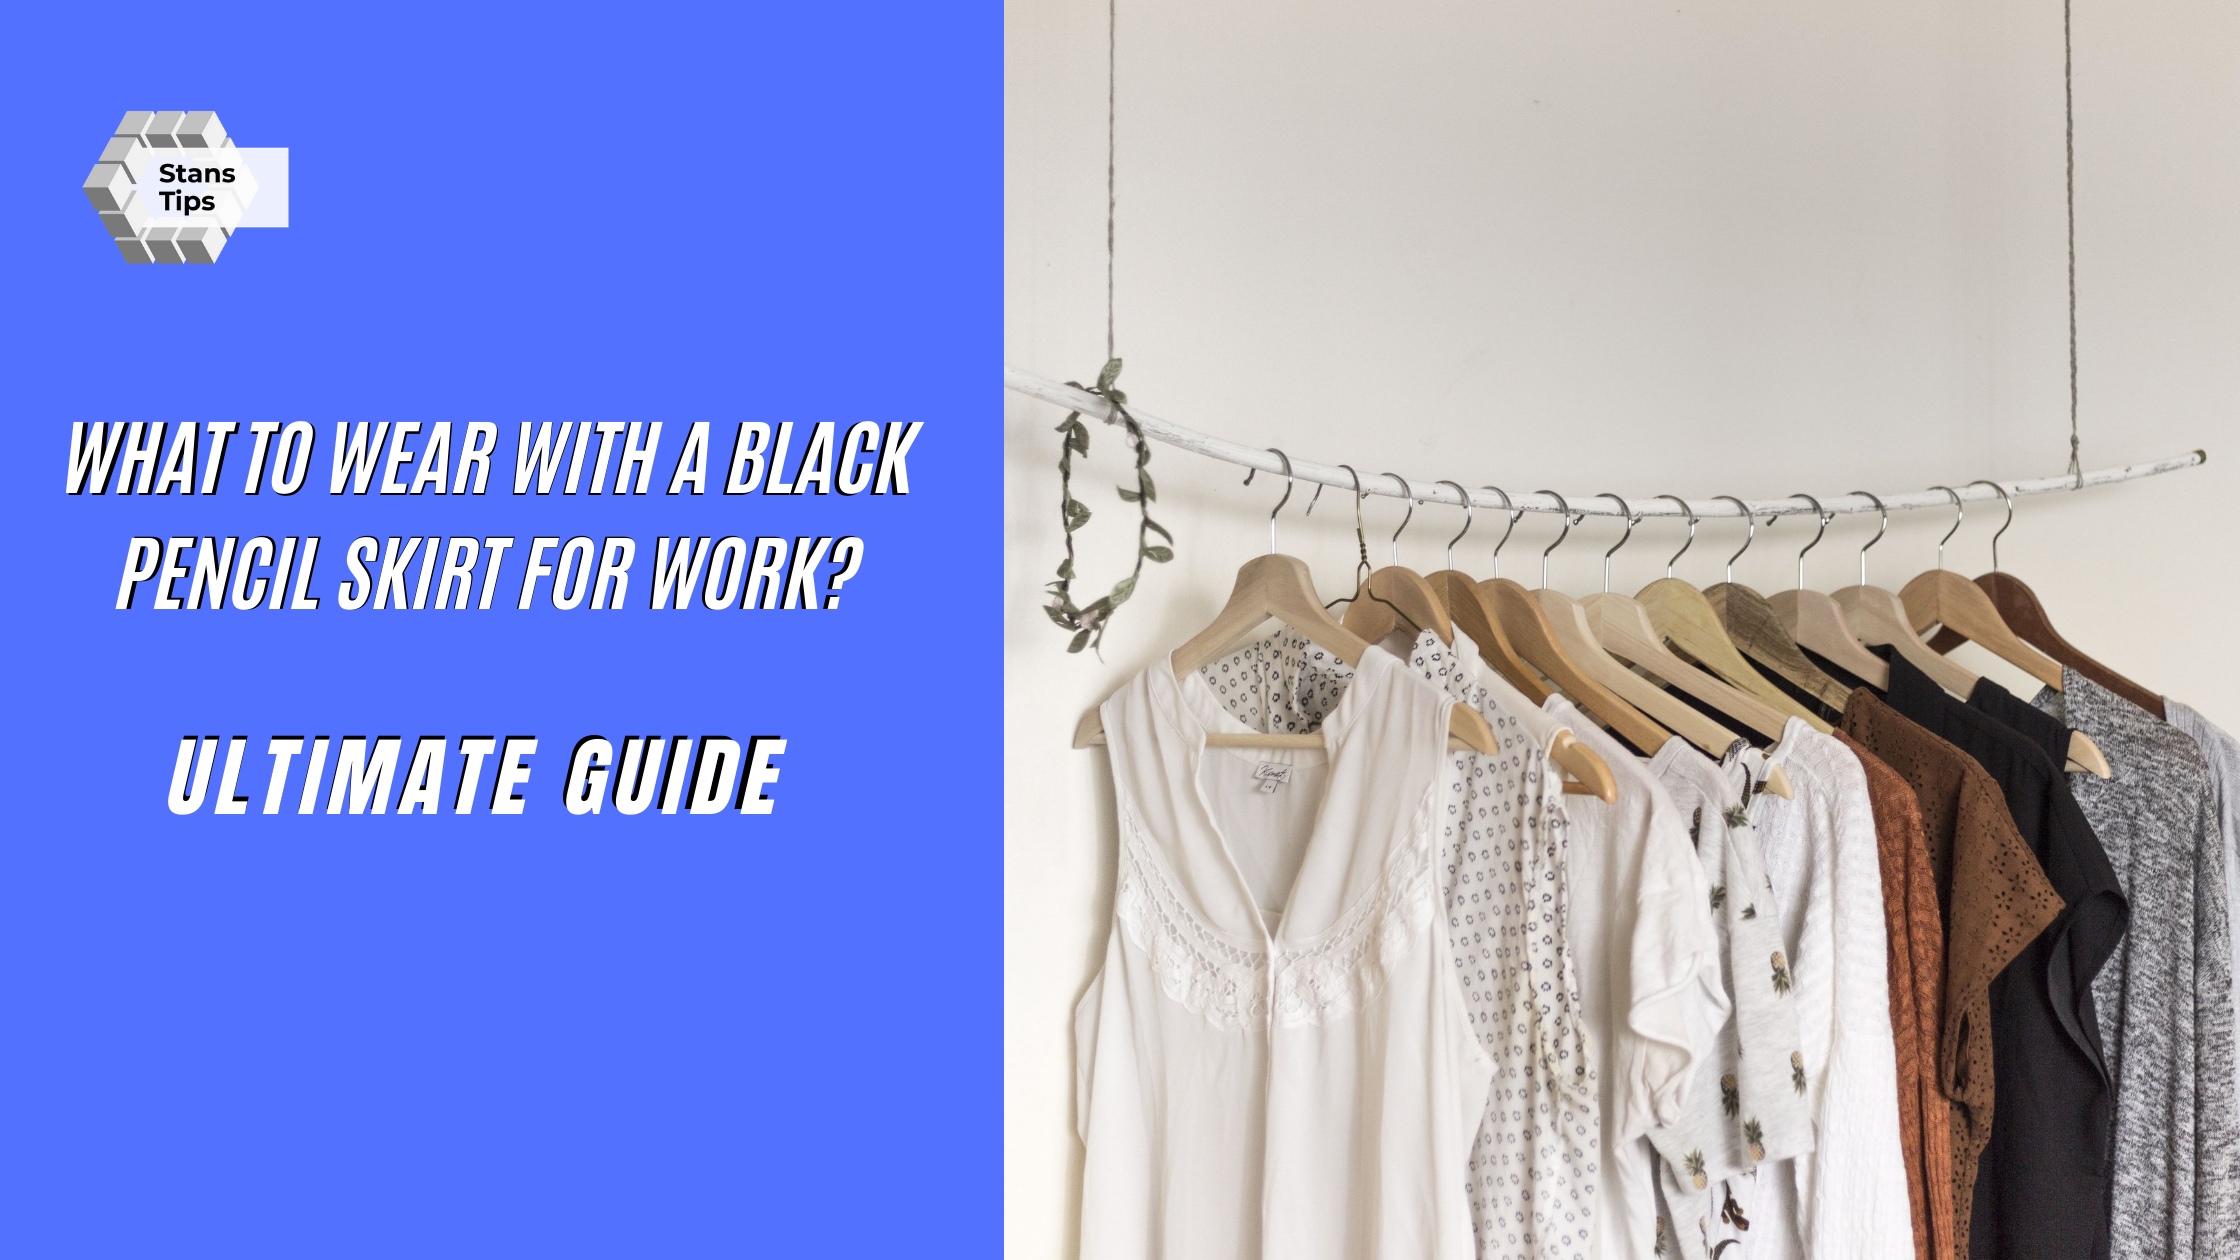 What to wear with a black pencil skirt for work